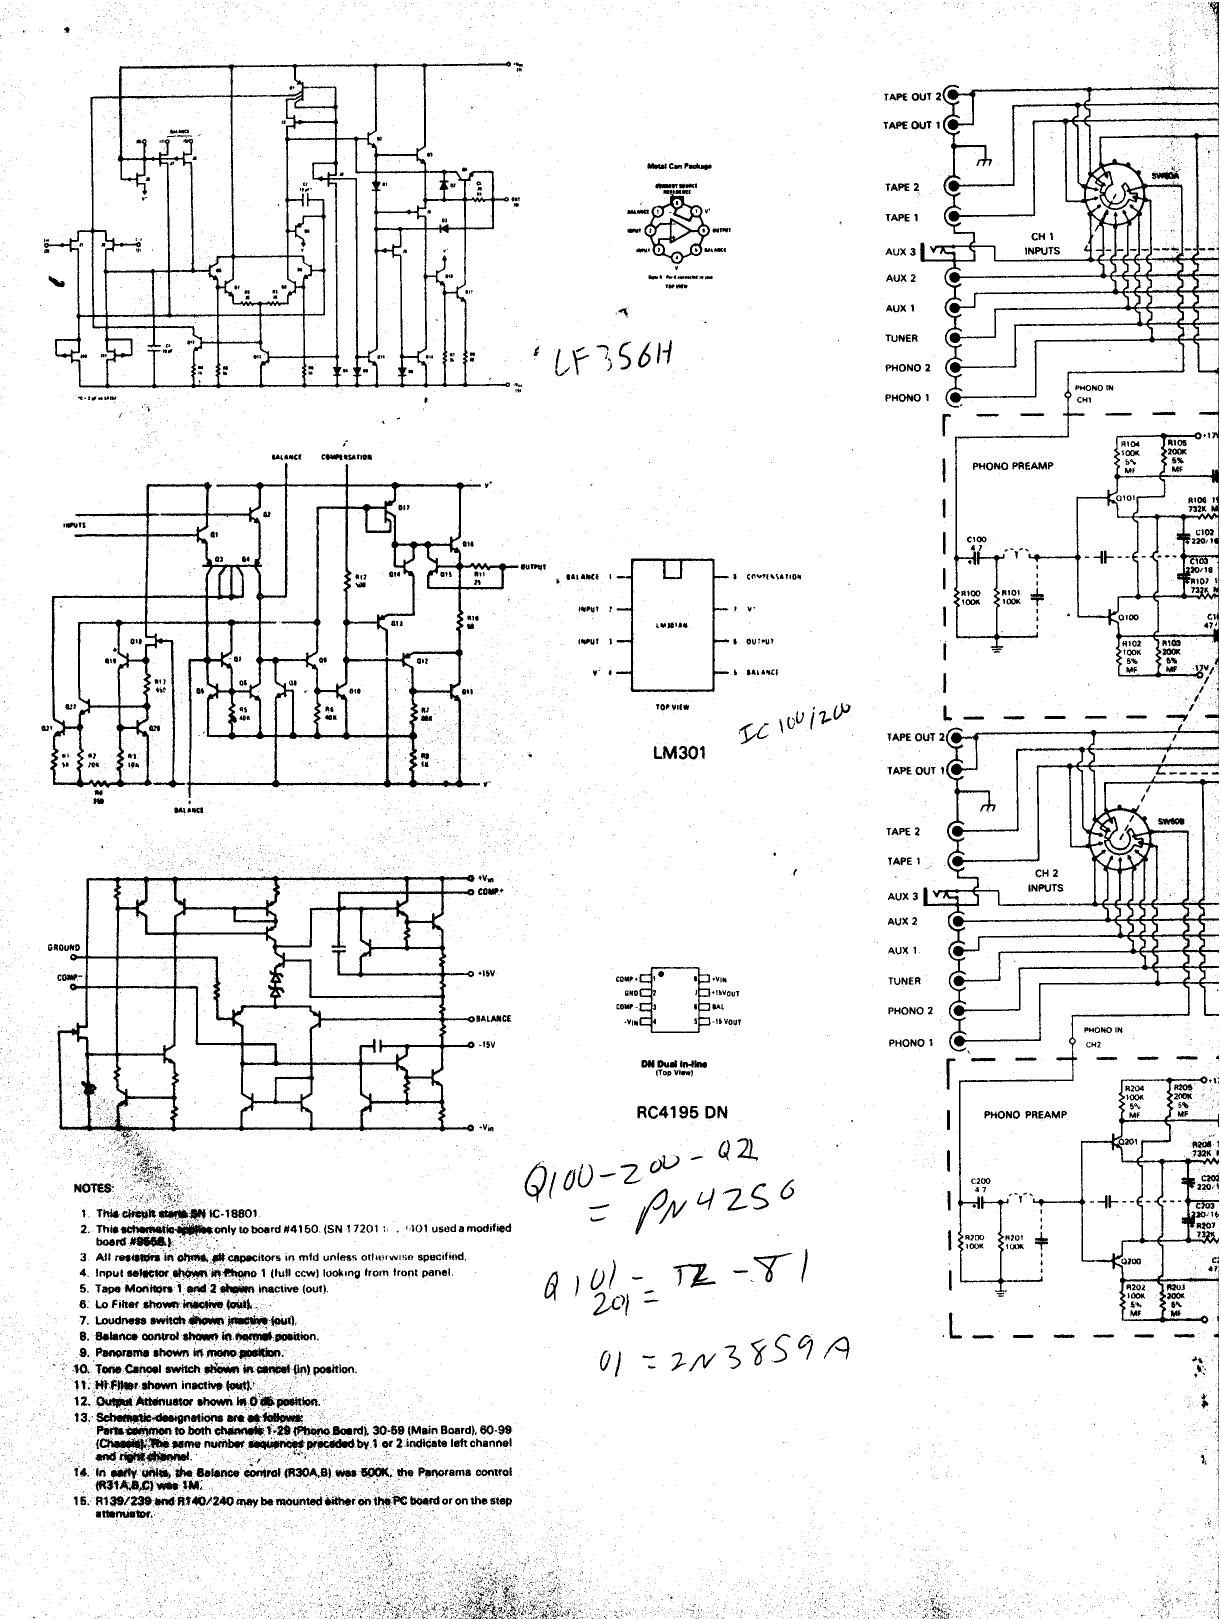 Crown IC 150 A Schematic